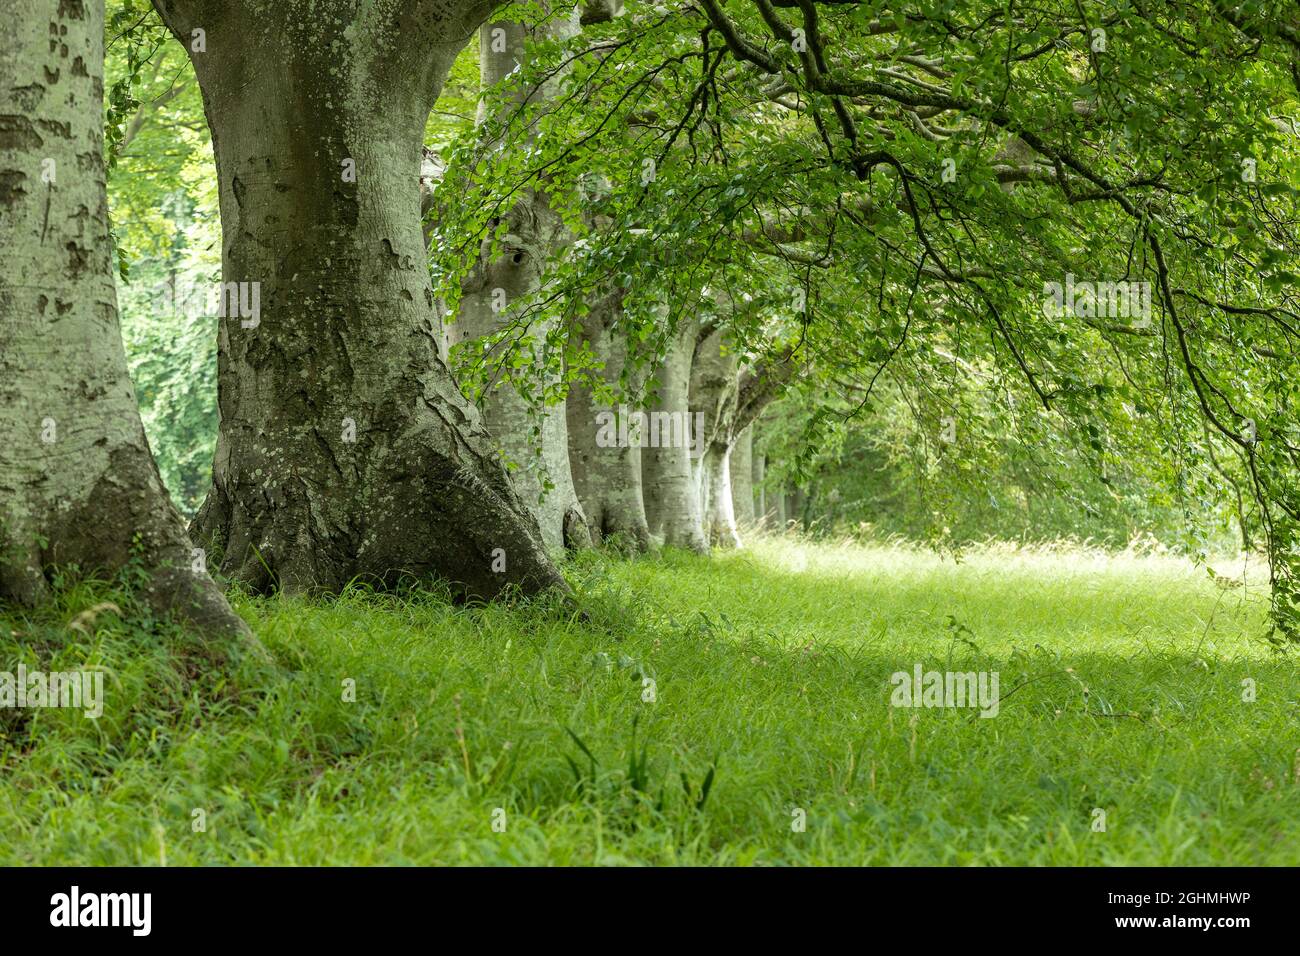 Beech trees and green foilage at Kingston Lacey Dorest England Stock Photo